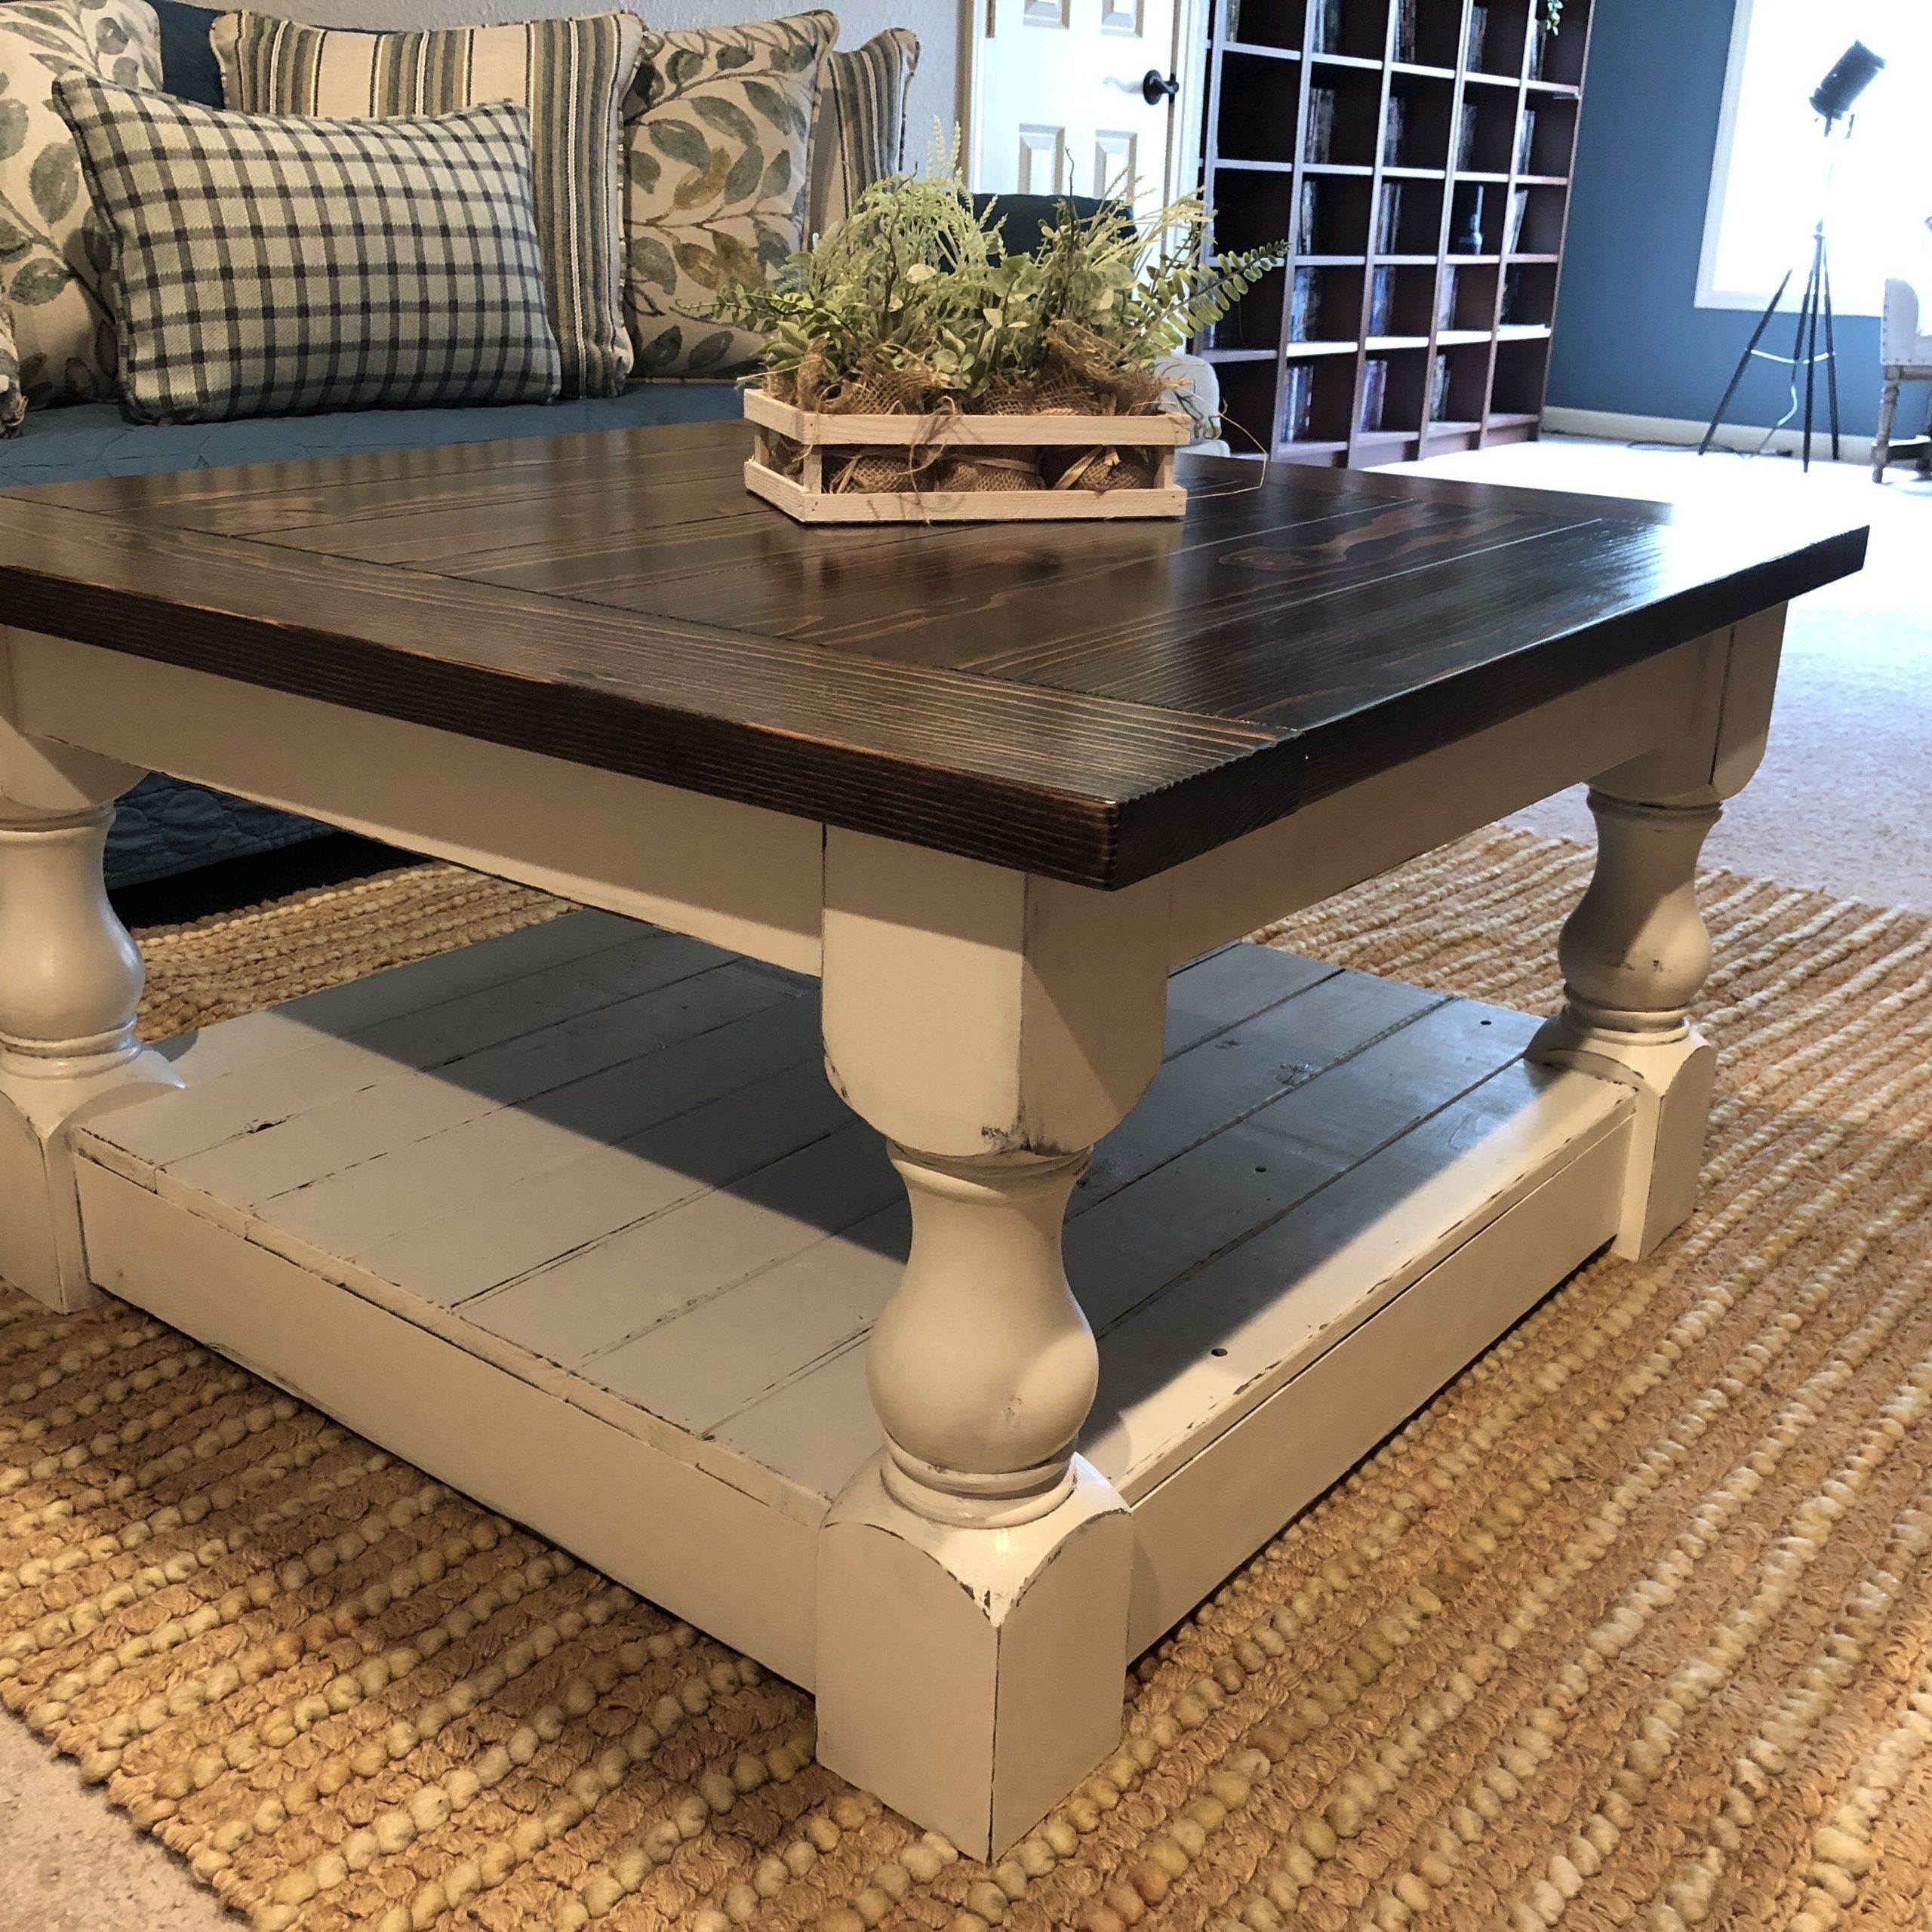 Rustic Square Coffee Tables: An Ideal Choice For Any Room – Coffee Inside Rustic Coffee Tables (Gallery 3 of 20)